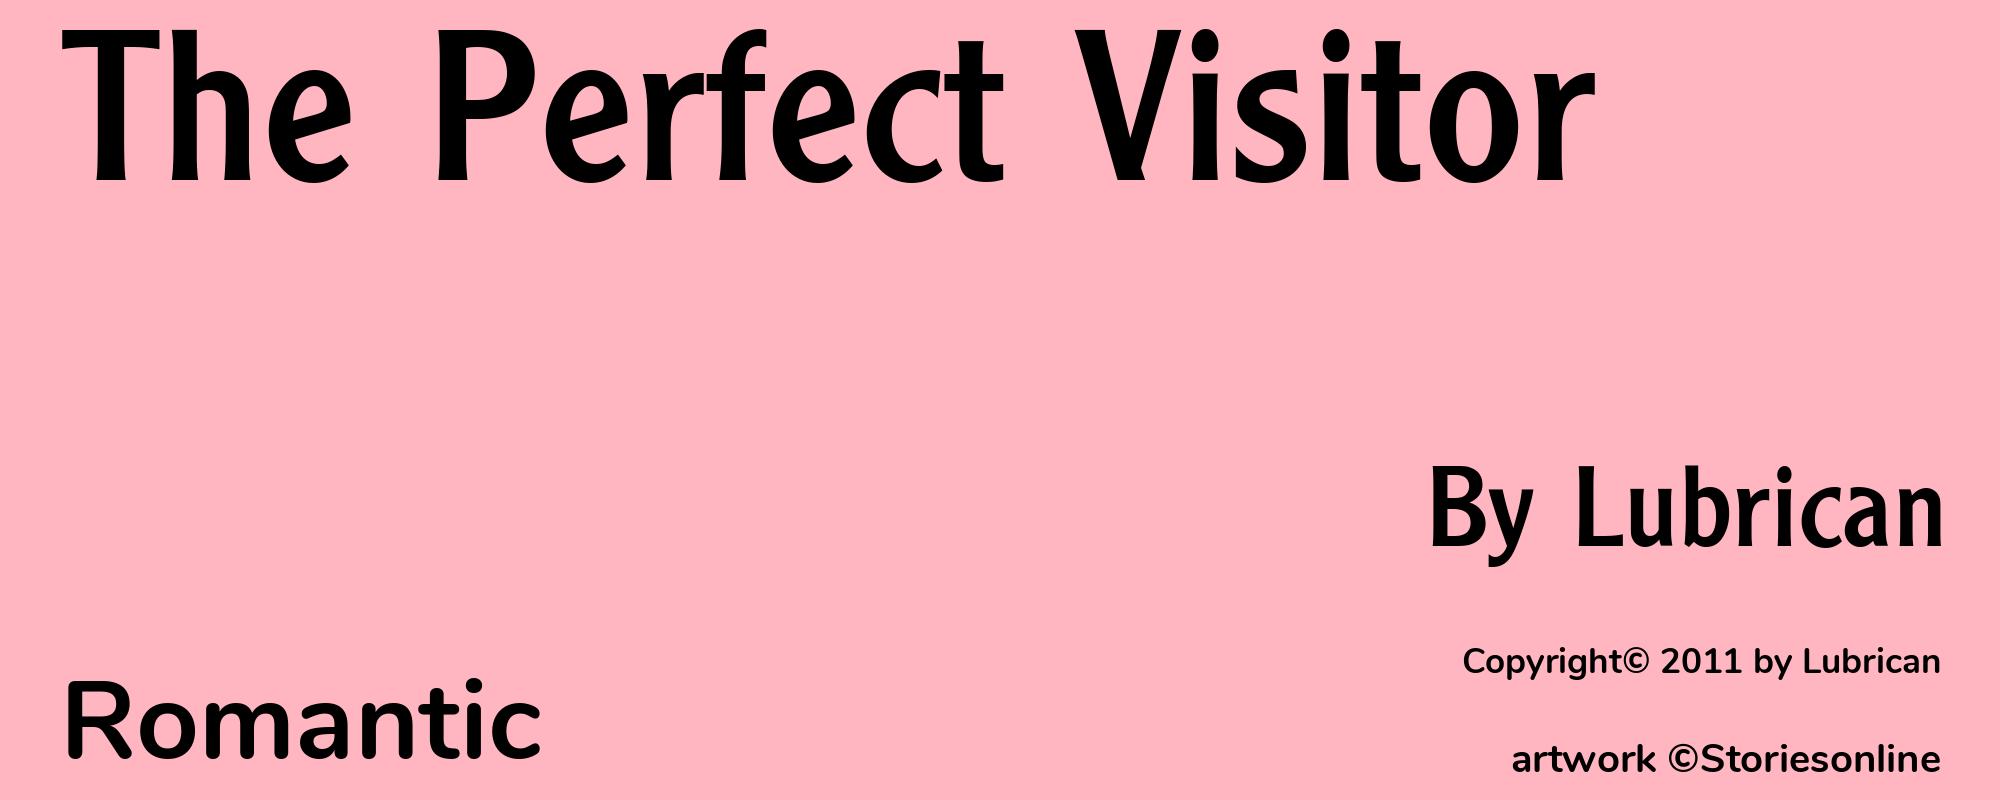 The Perfect Visitor - Cover